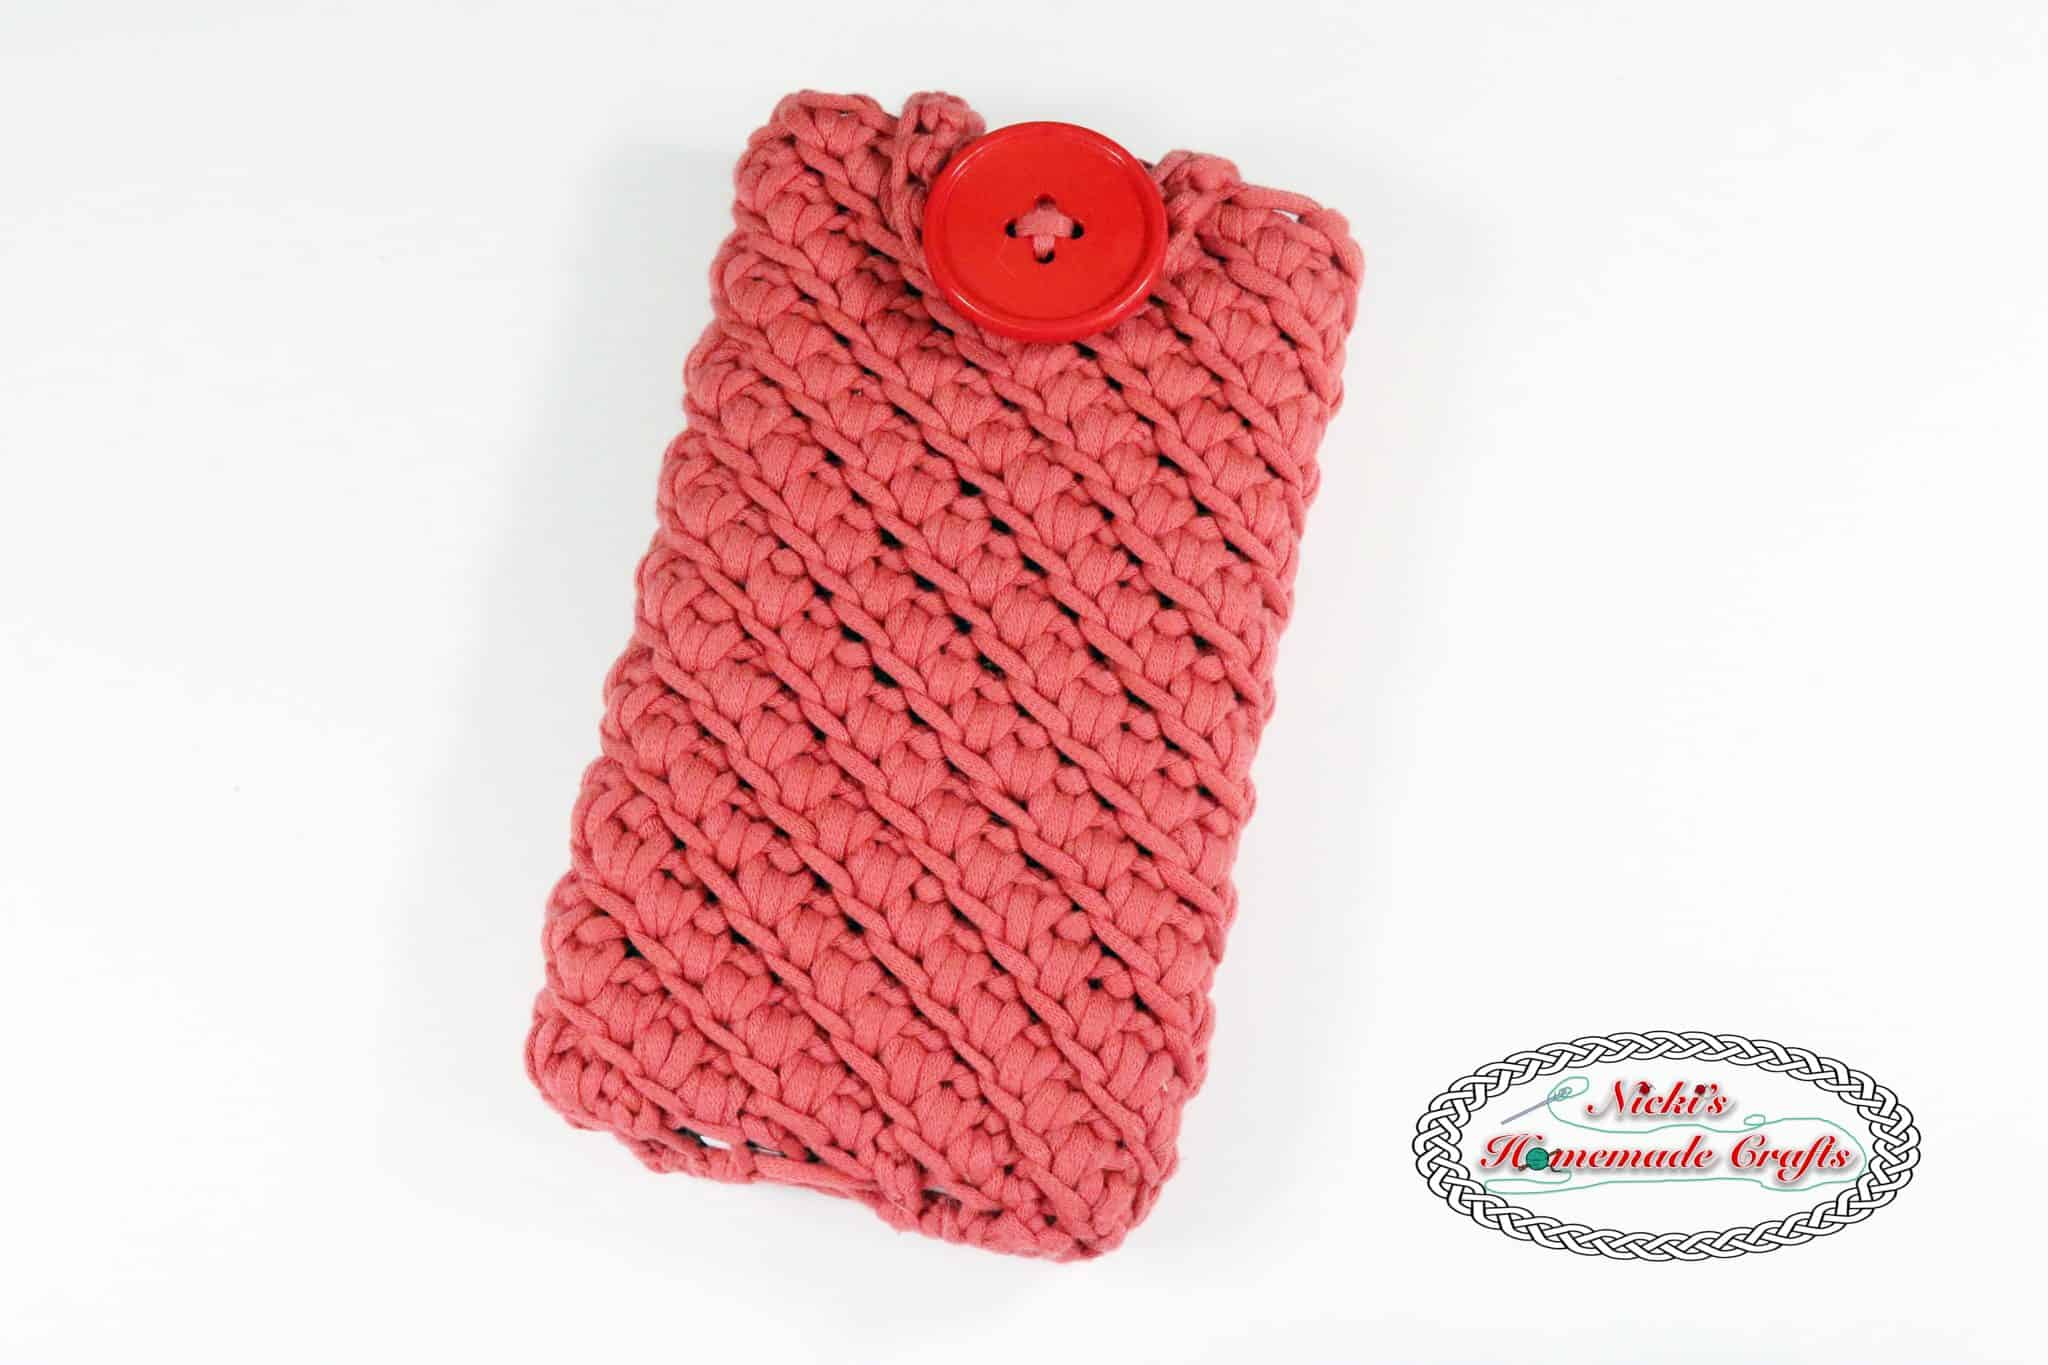 Cell Phone Pouch - Free Crochet Pattern - Nicki's Homemade Crafts